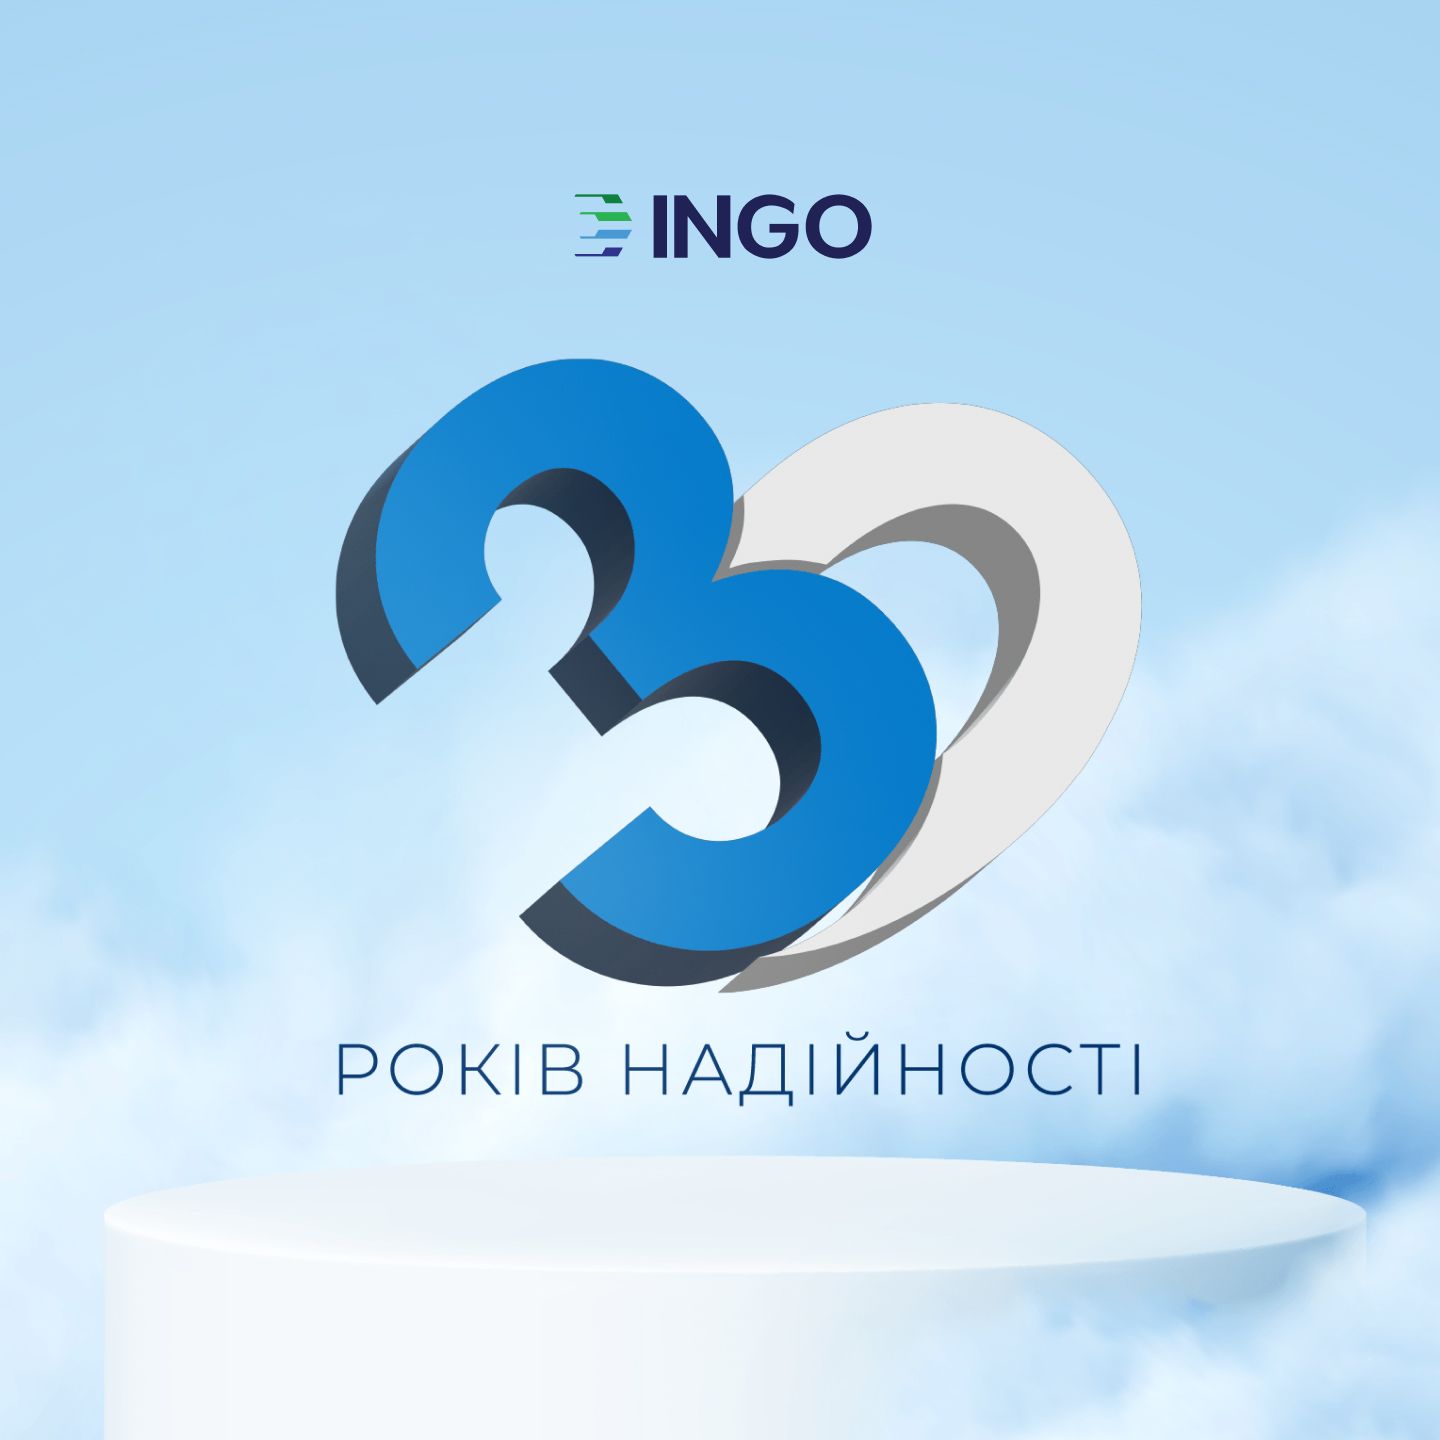 INGO: 30 Years of Best Insurance Solutions for People and Companies